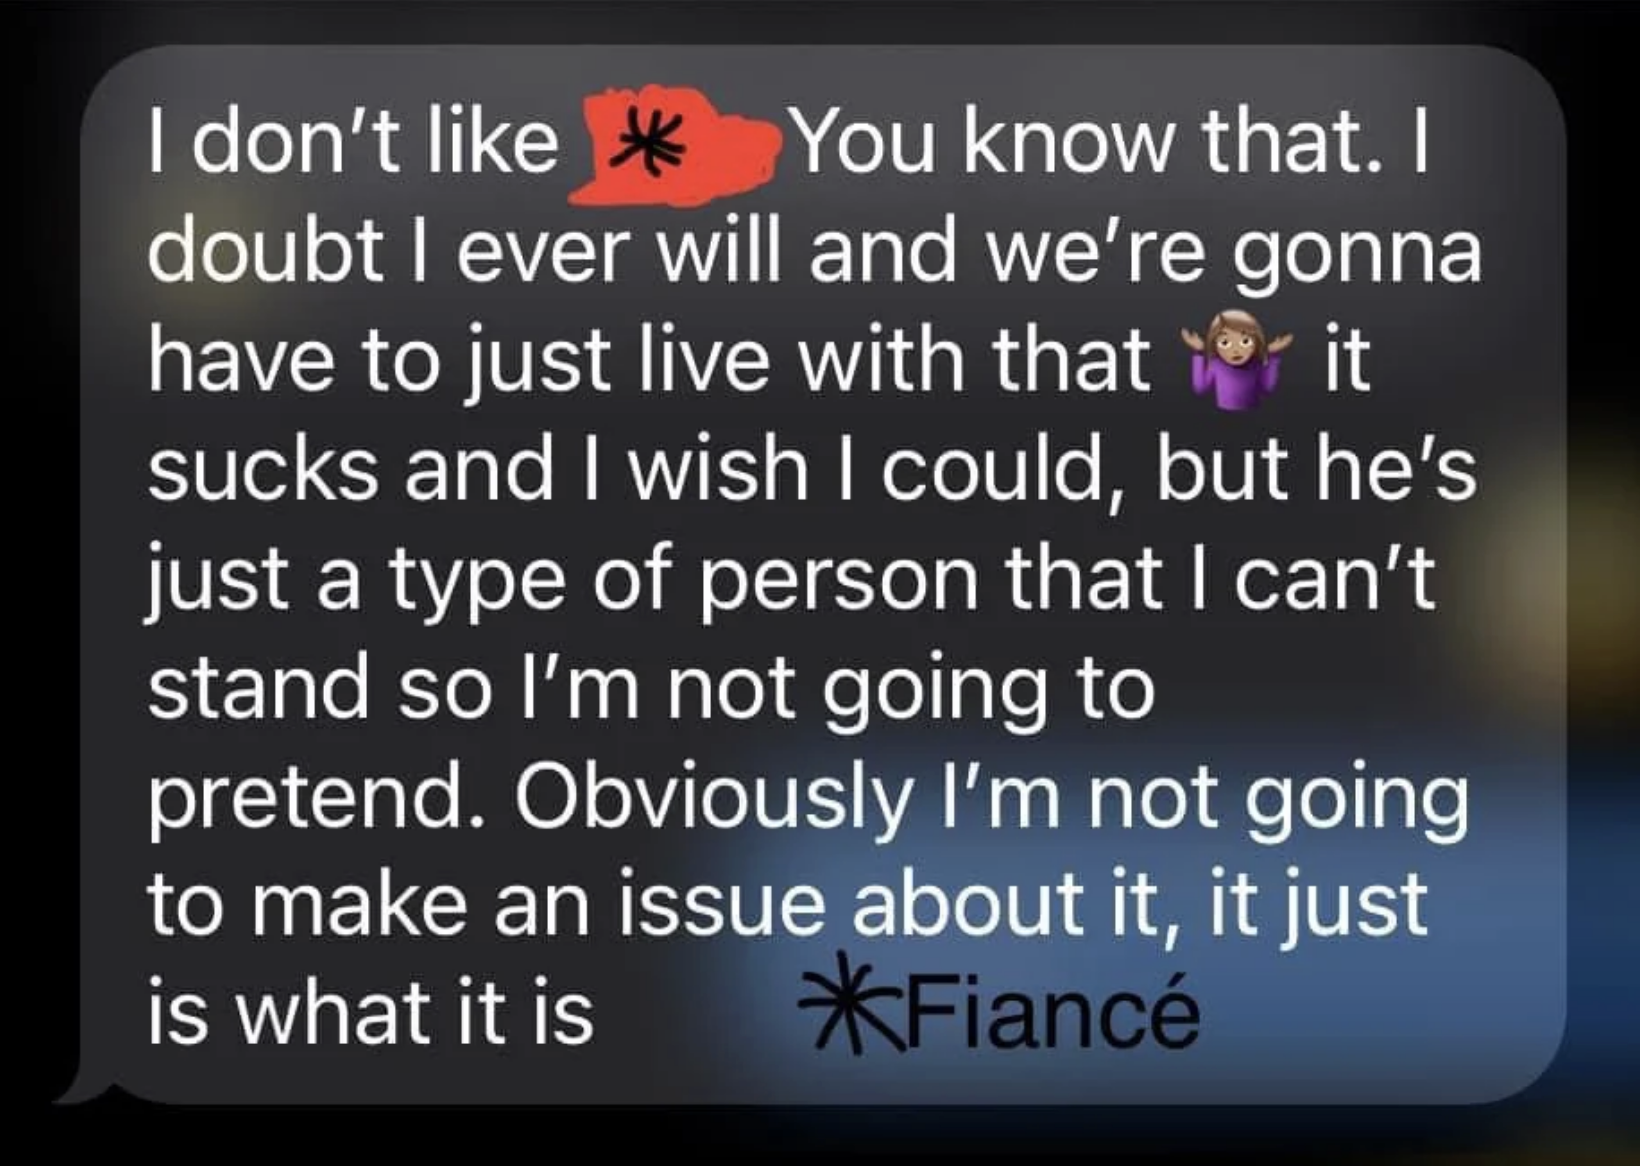 last message also stating that they don&#x27;t like the fiance